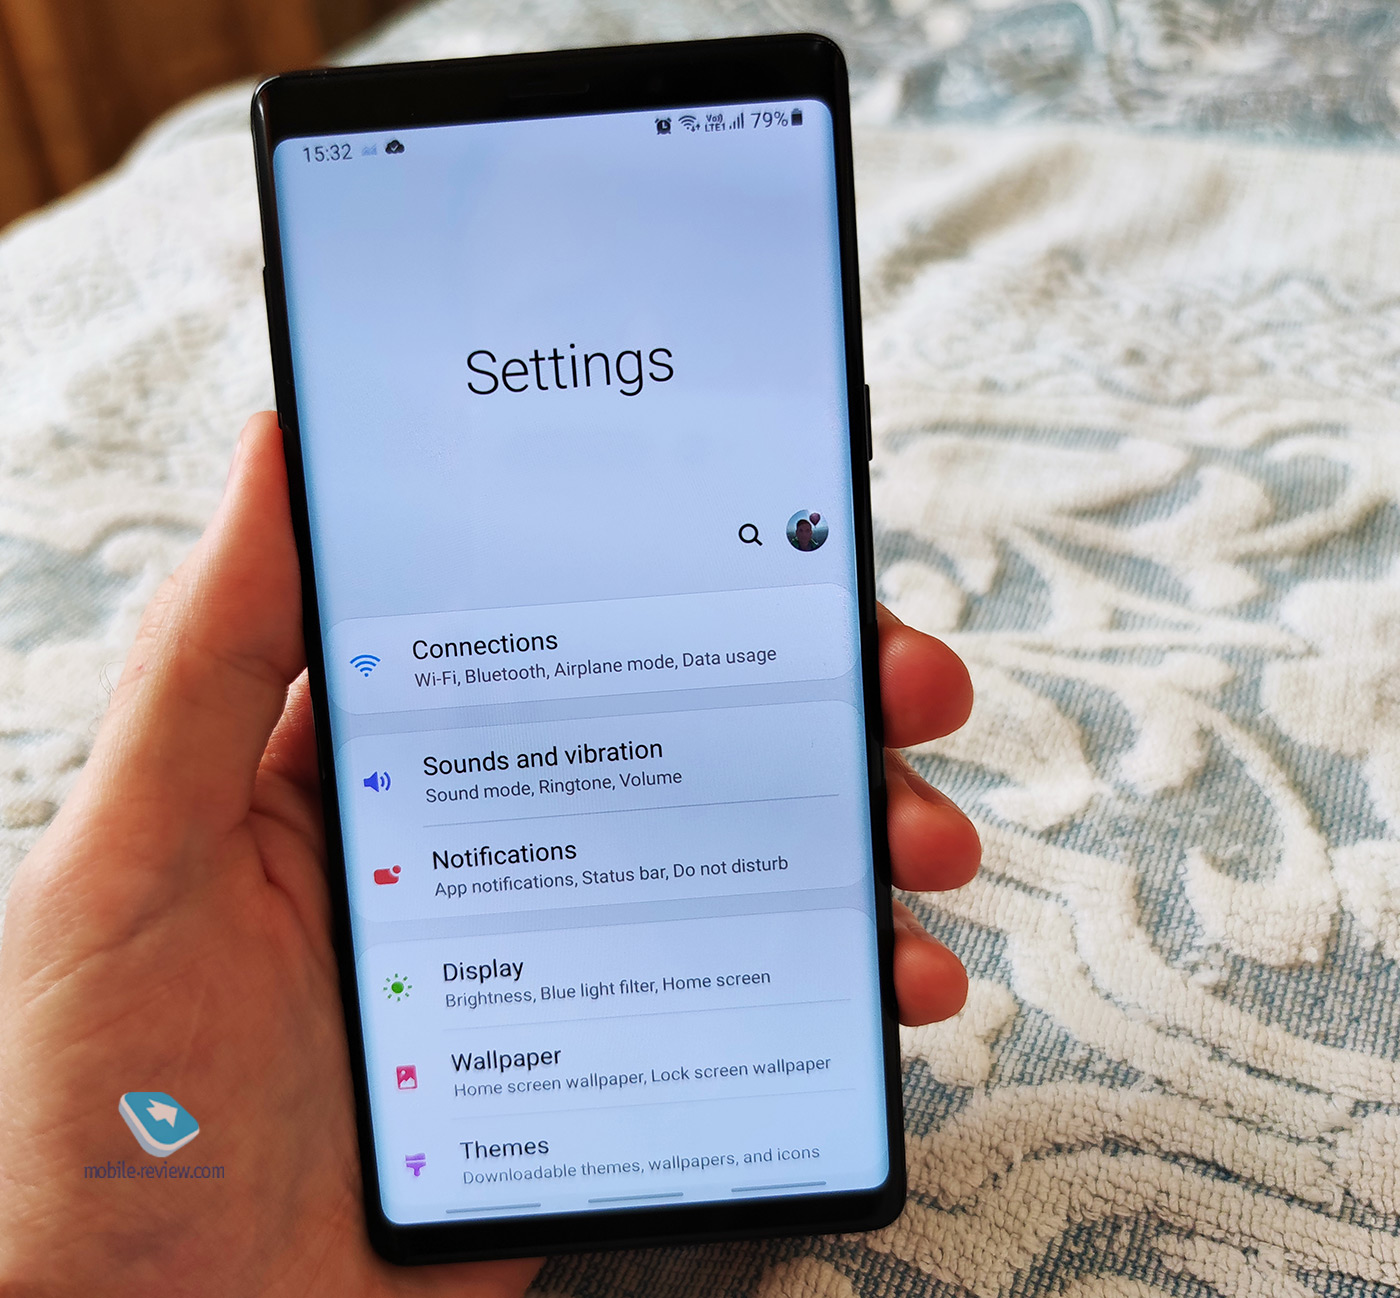 # Echo94: my experience of operating Samsung Galaxy Note 9